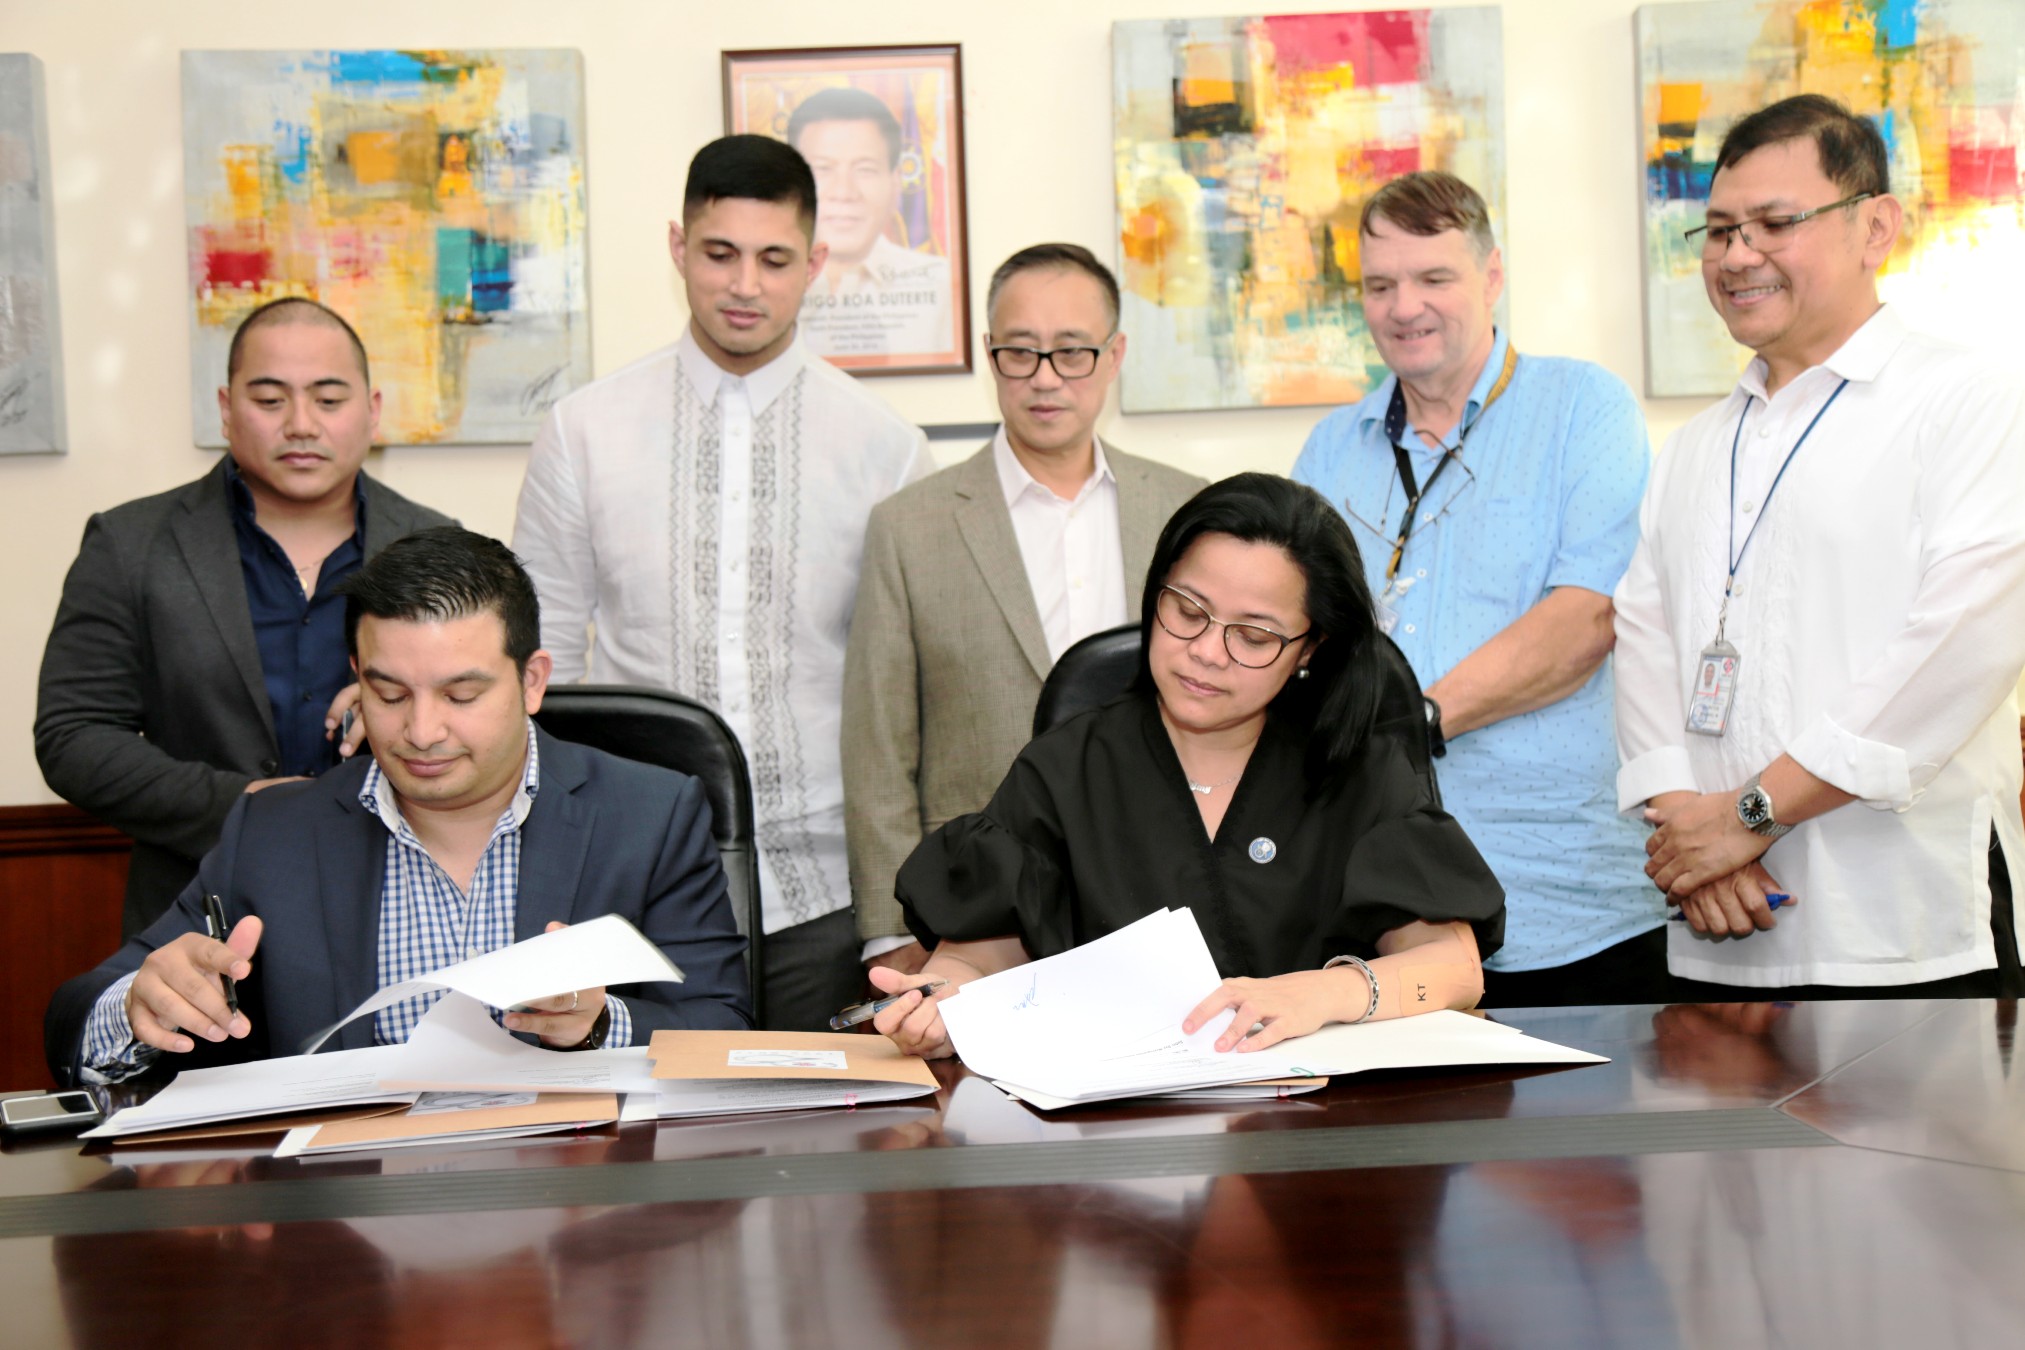 SBMA Chairman and Administrator Wilma T. Eisma and Mahanakorn Partners Group managing partner Luca Bernardinetti sign a memorandum of understanding for the conduct of feasibility studies of major infrastructure projects in the Subic Bay Freeport.